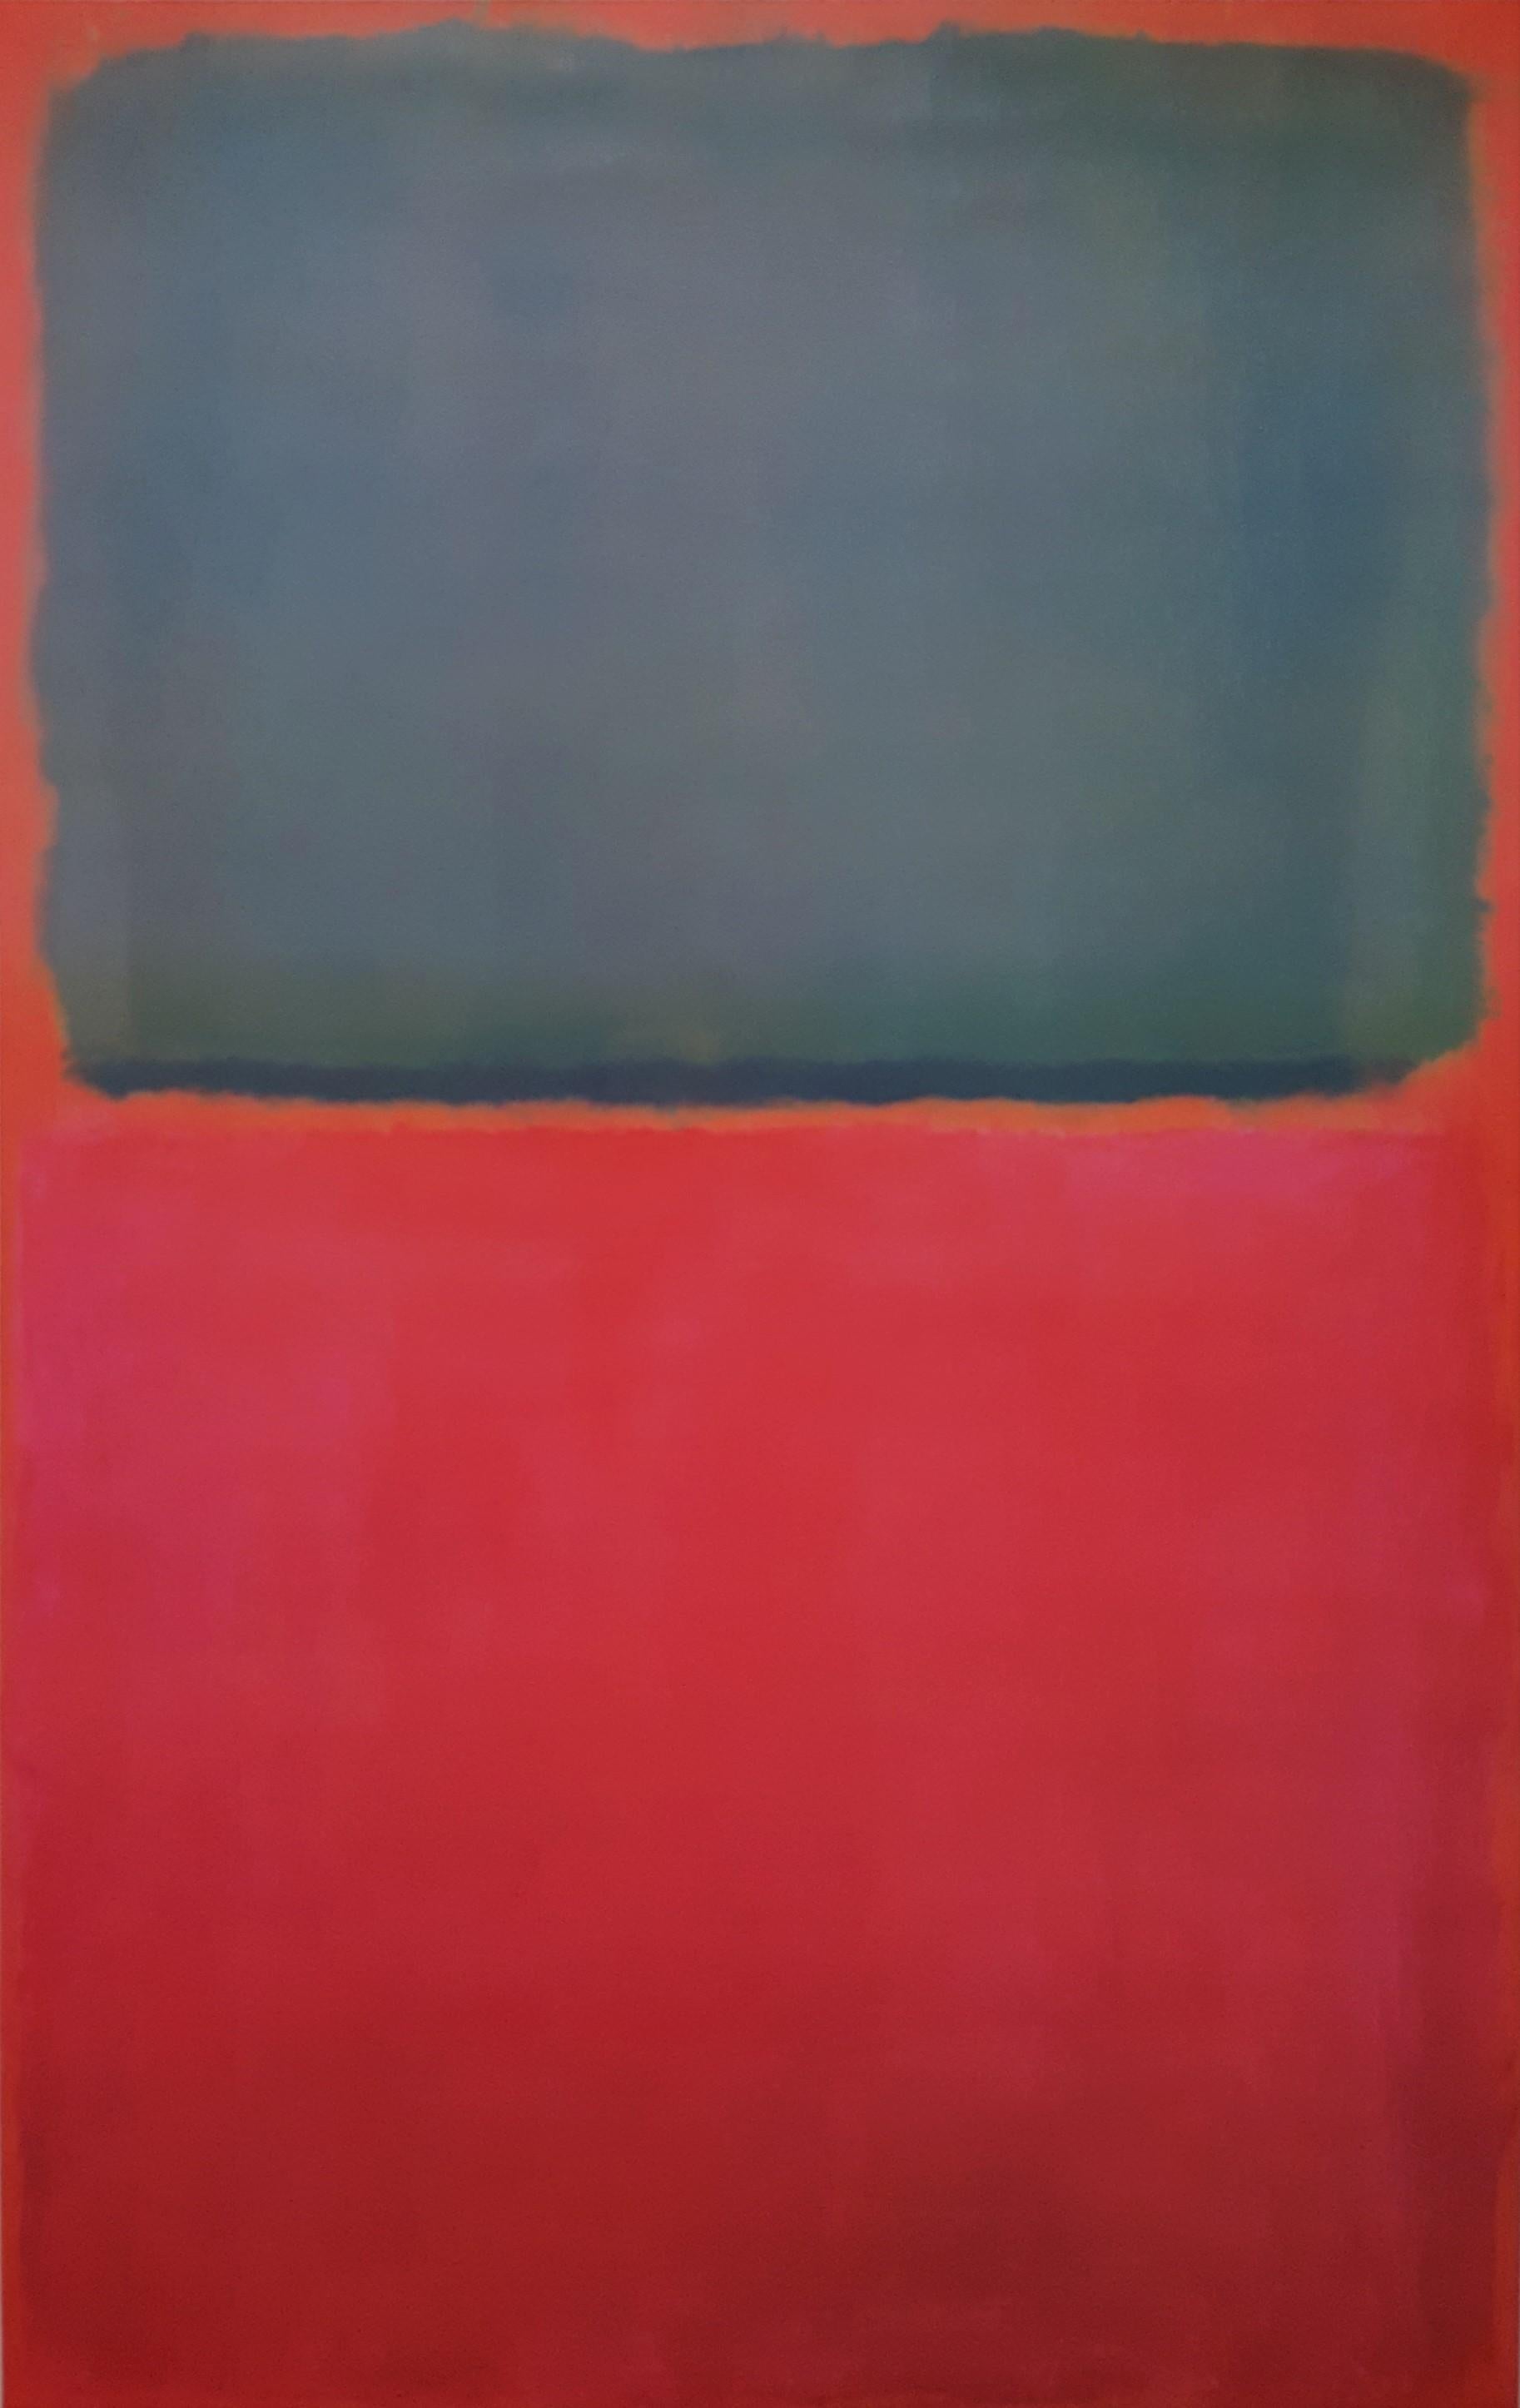 Green, Red, on Orange - Print by (after) Mark Rothko